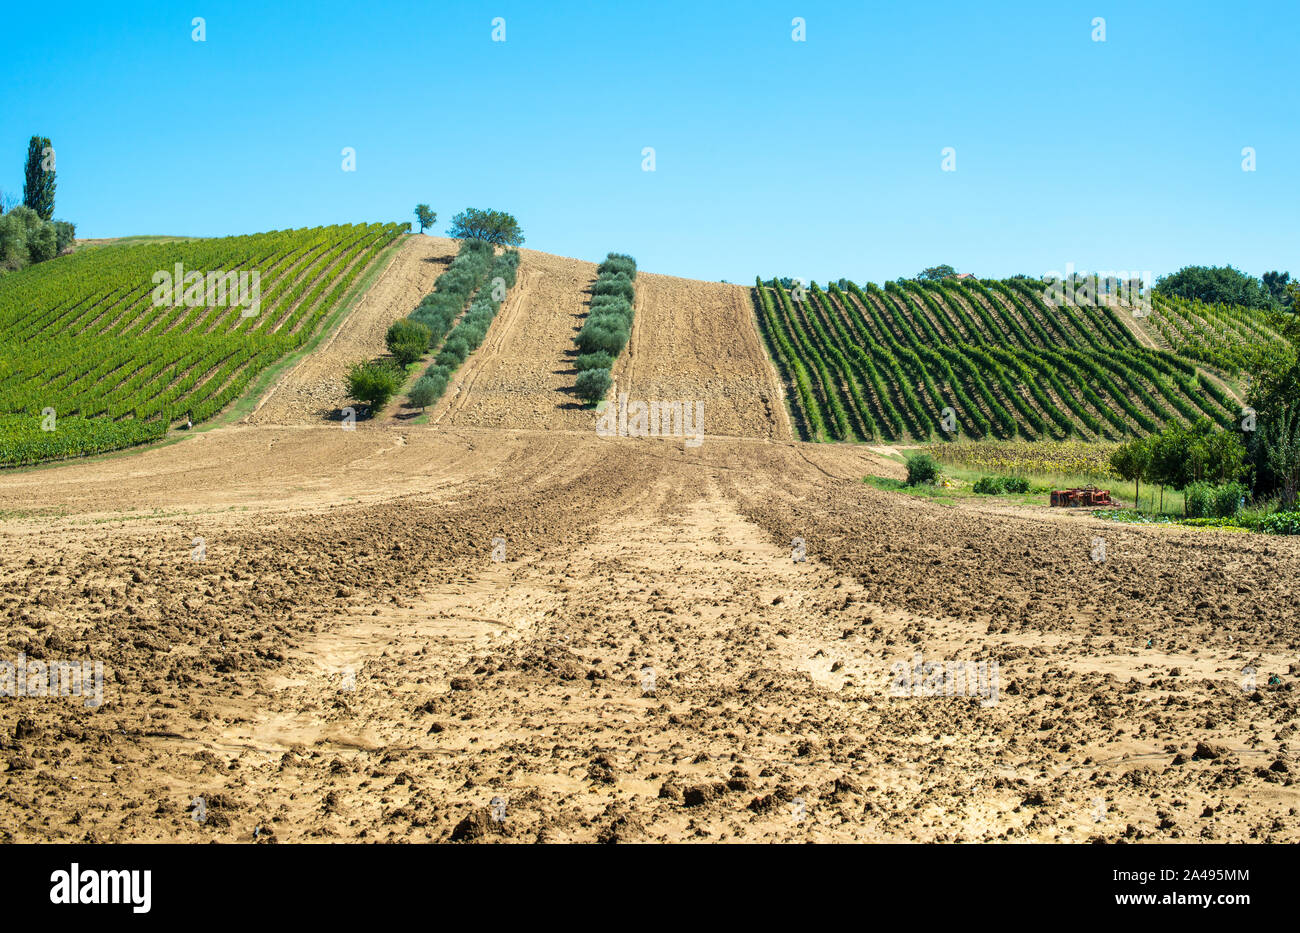 Olive trees in rows and vineyards in Italy. Olive and wine farm. Tilled ground soil. Agriculture field with olive trees. Stock Photo